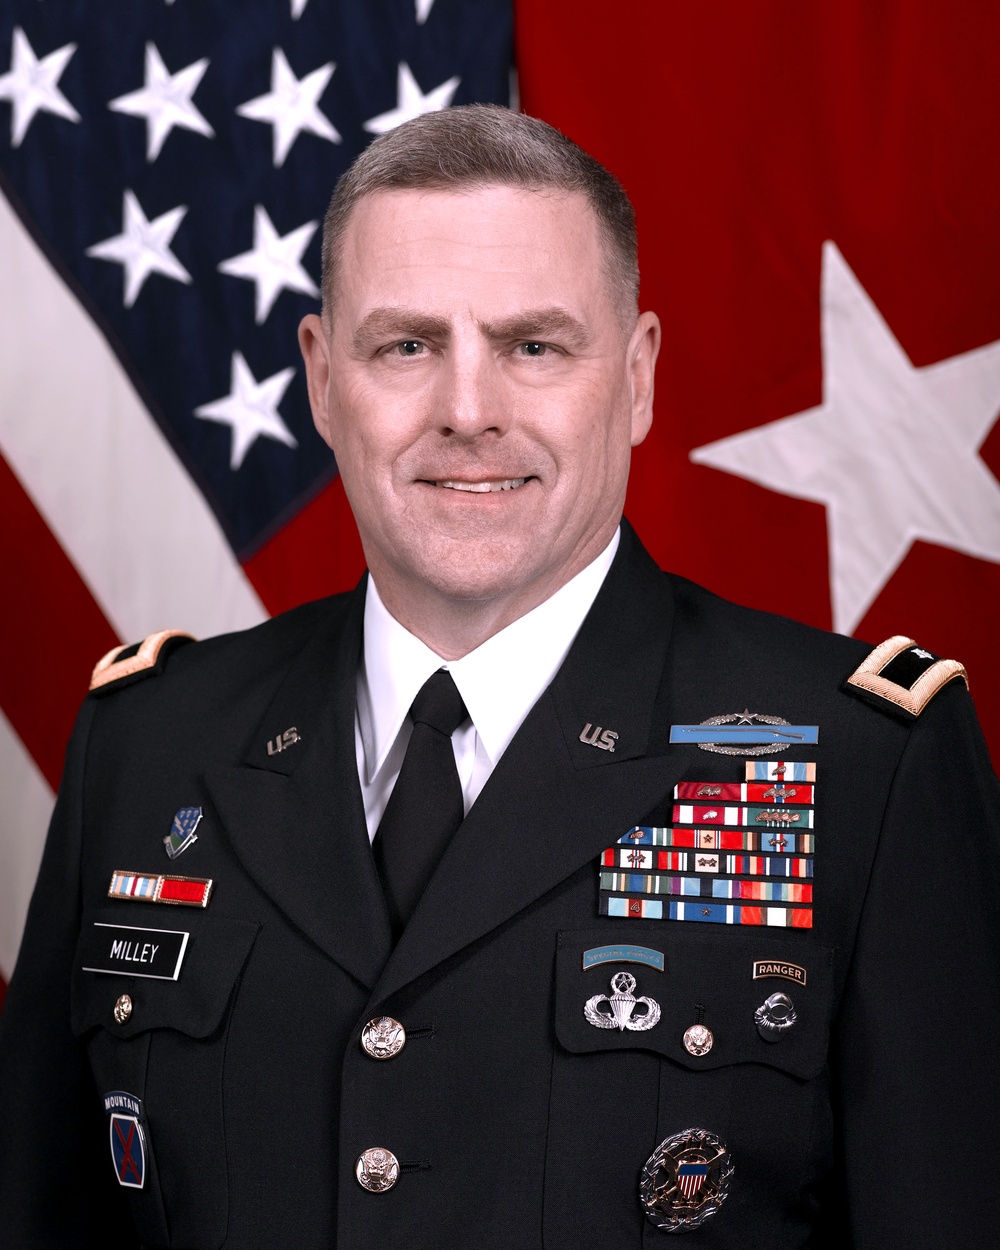 Milley confirmed for 3rd star, command of III Corps